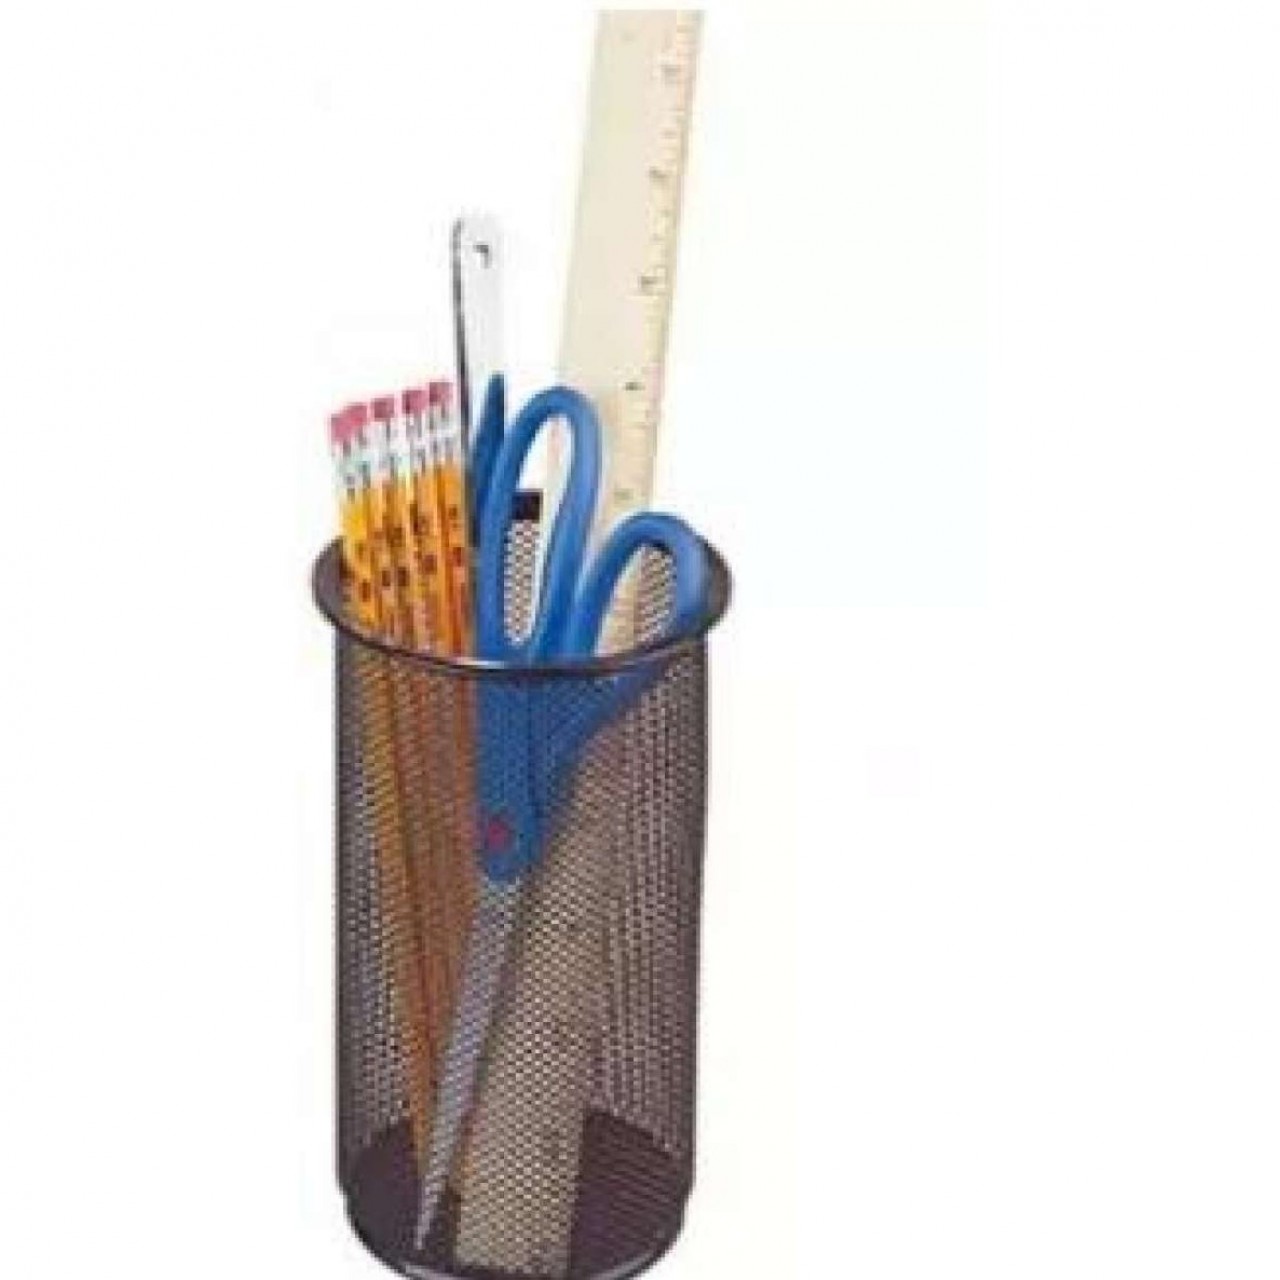 Pen Stand For Office Use - Metal Mesh